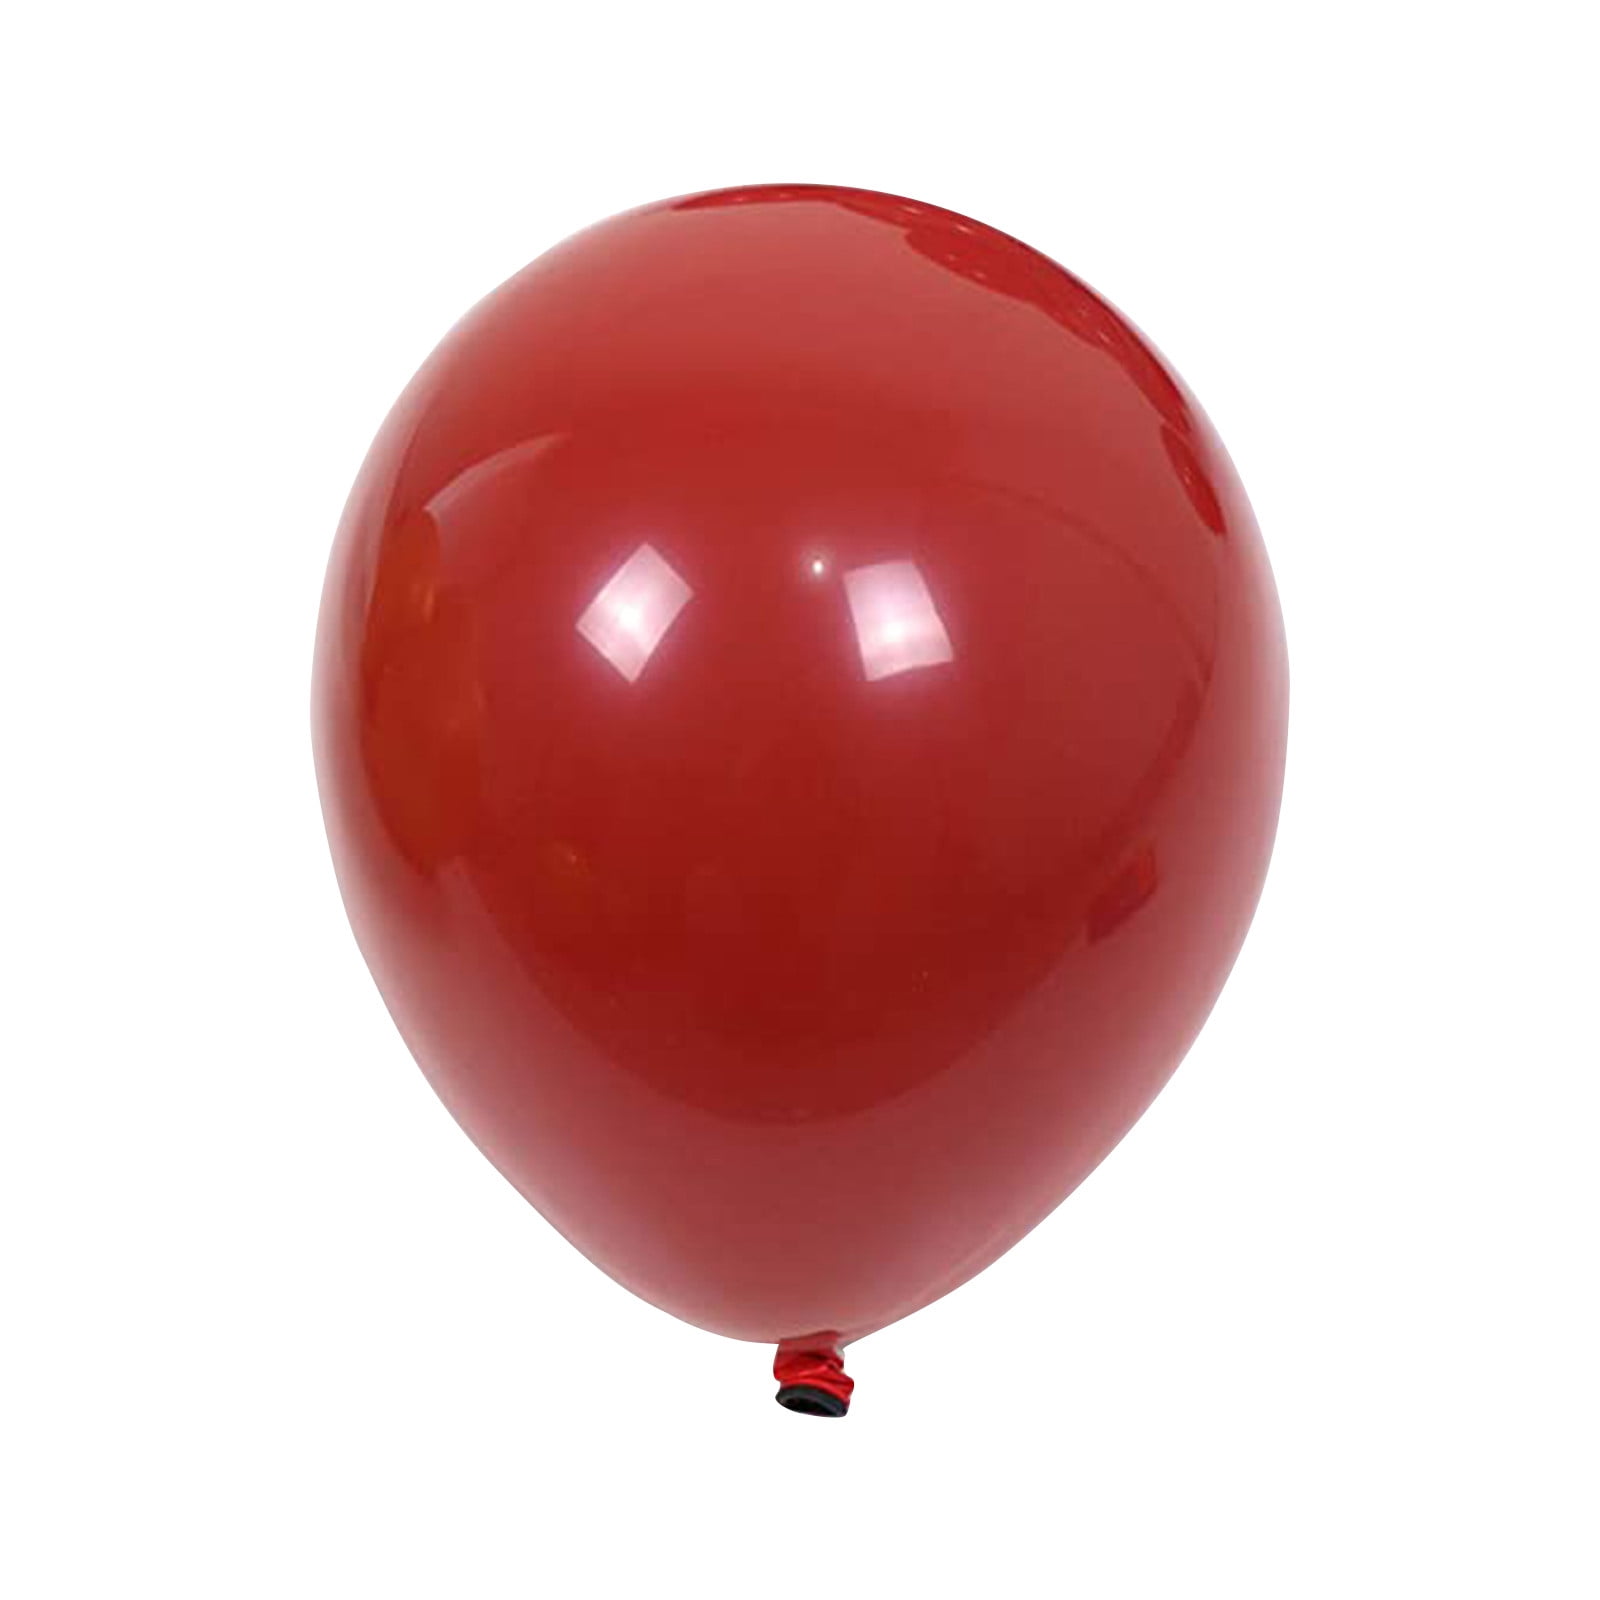 Details about   12 inch Red Latex Balloons Wedding Bachelorette Birthday Party New Year Decor h